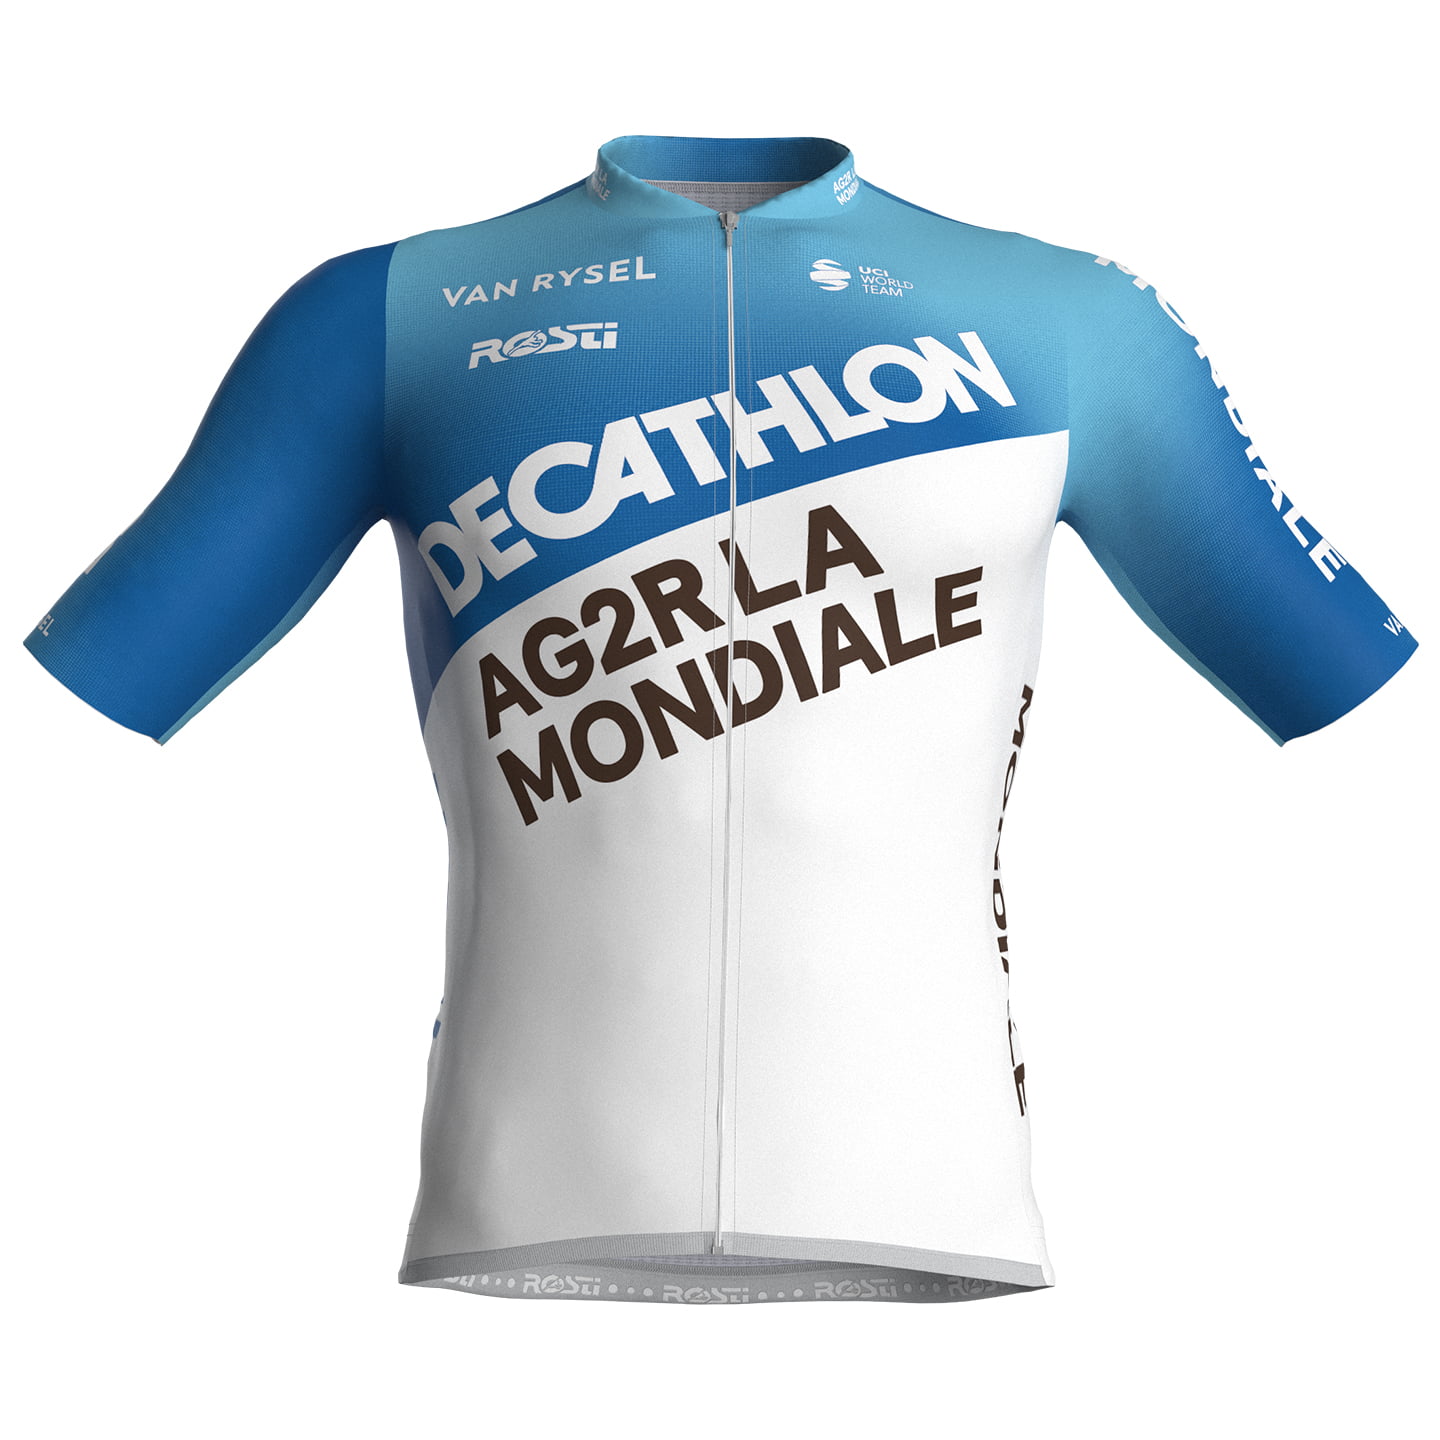 DECATHLON AG2R LA MONDIALE 2024 Short Sleeve Jersey Short Sleeve Jersey, for men, size L, Cycling shirt, Cycle clothing